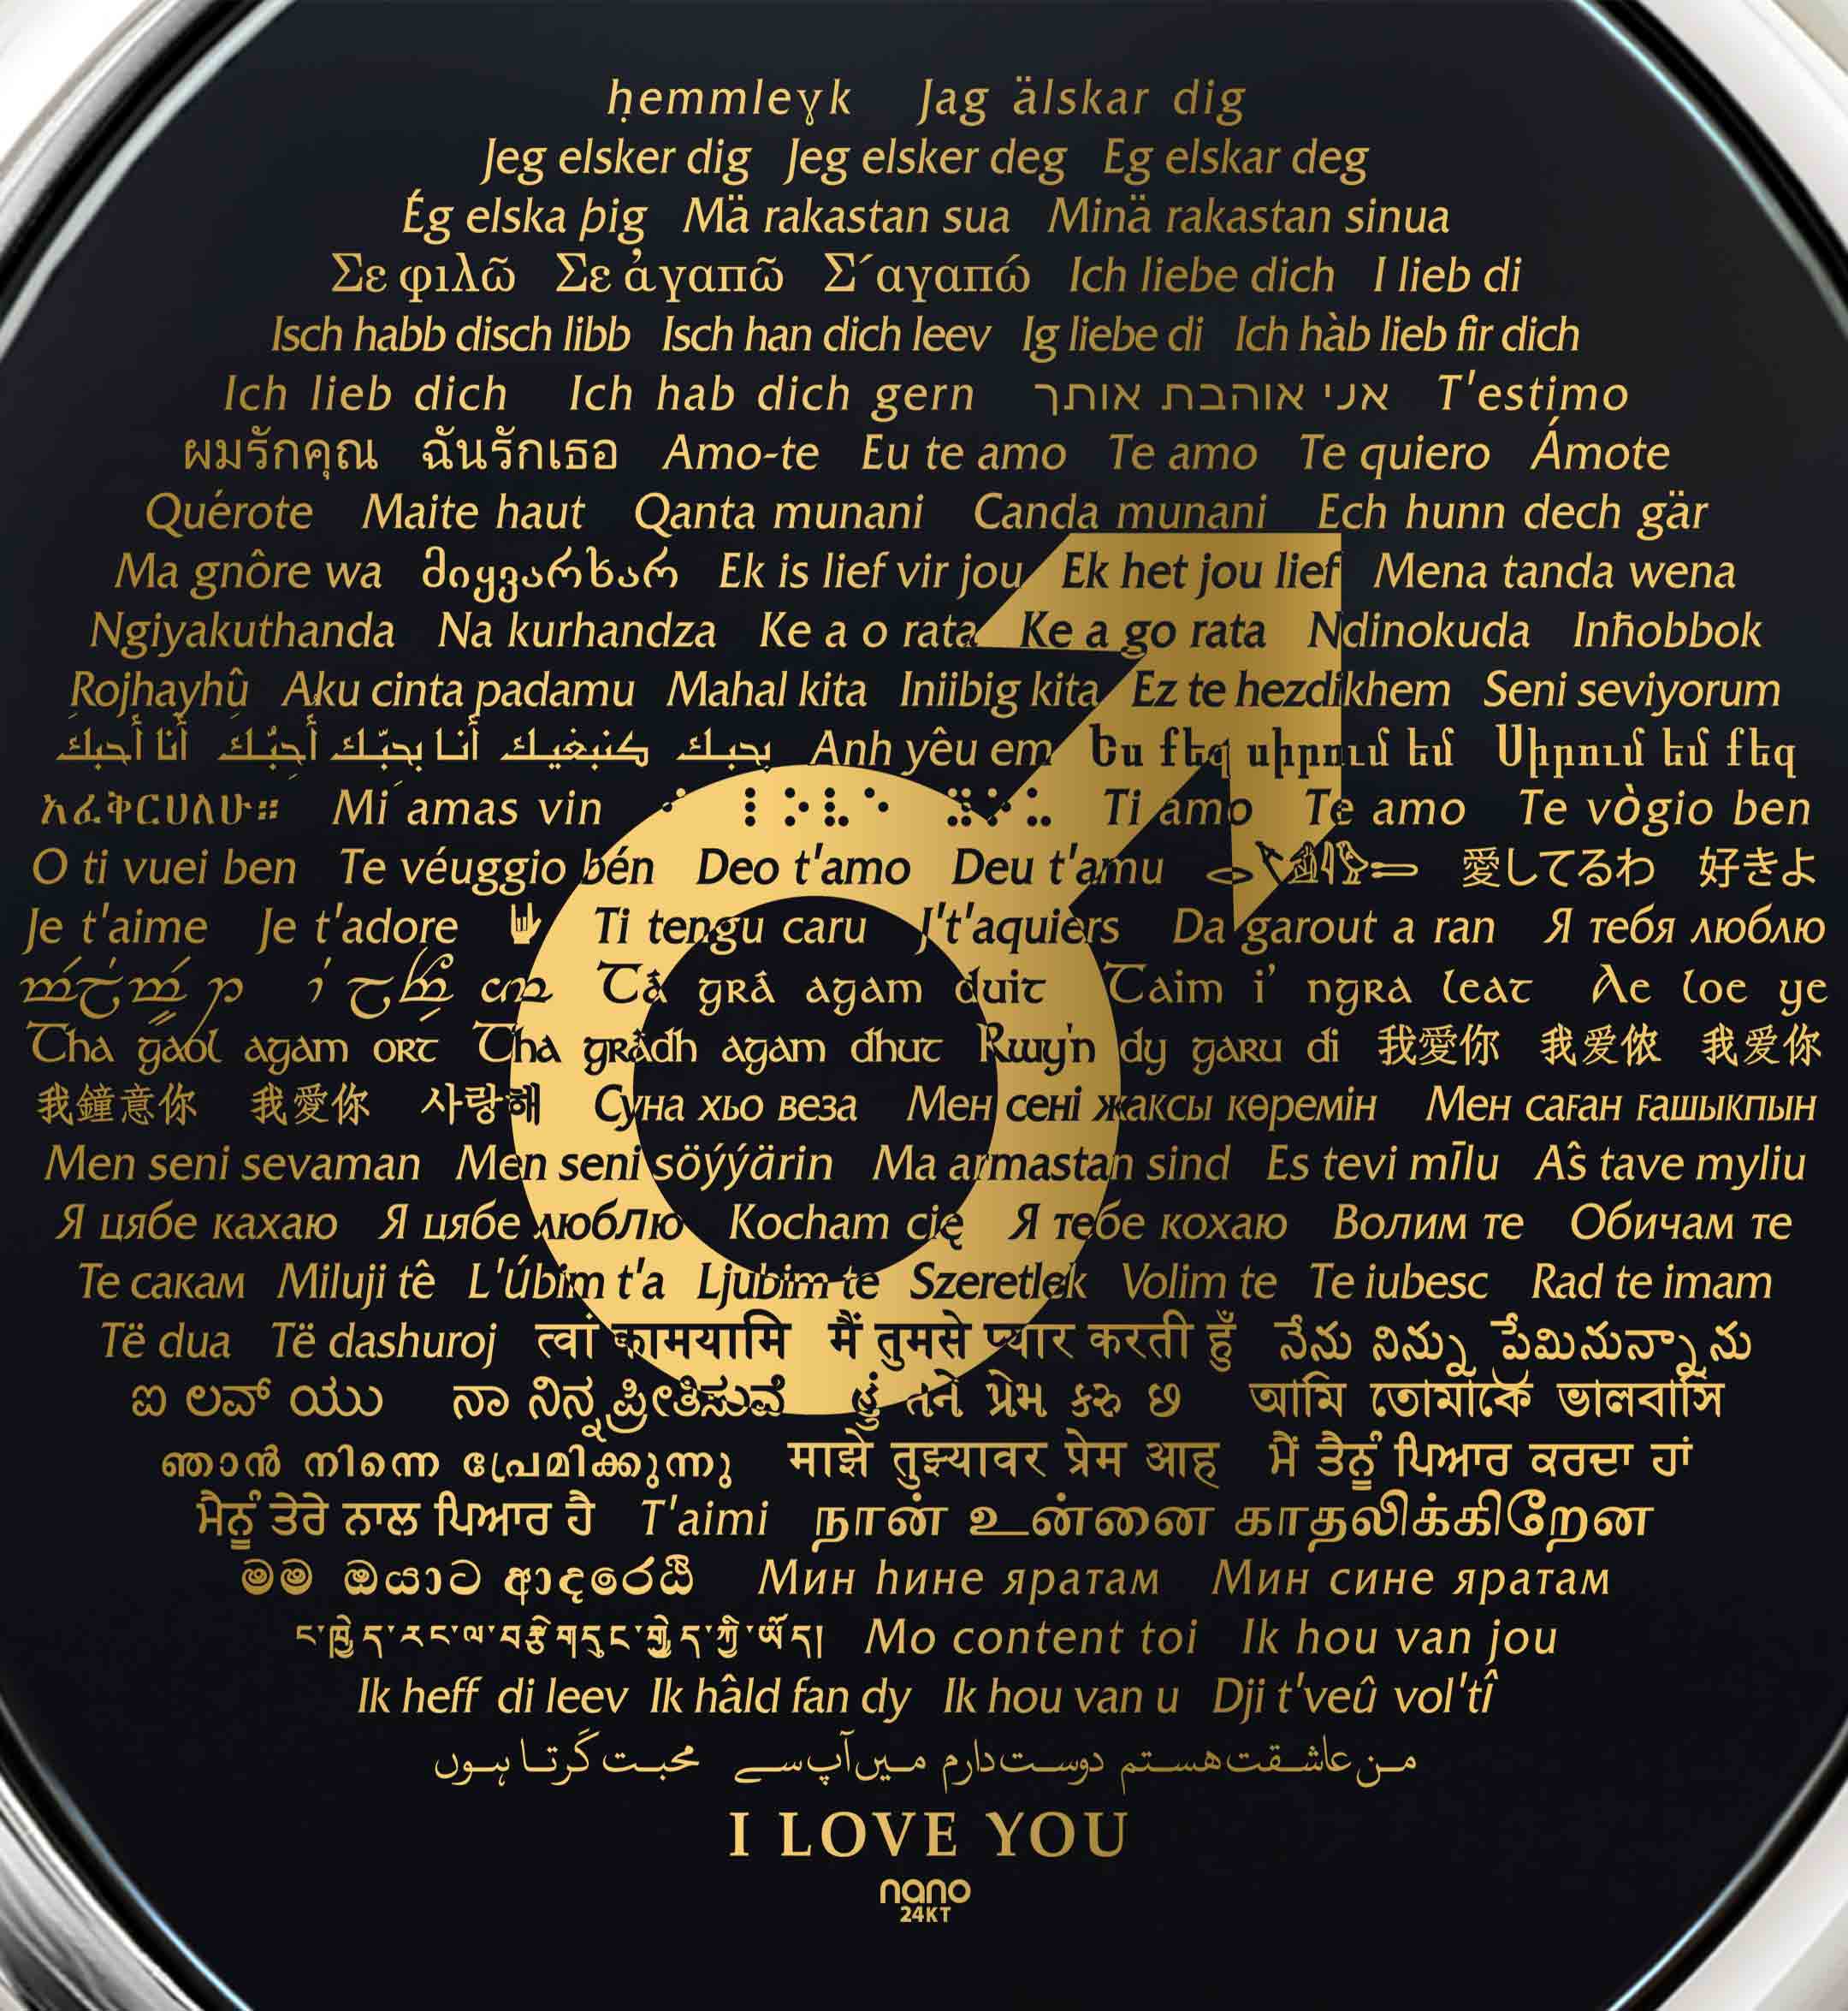 Round Onyx Pendant - 'I Love You' in 120 Languages